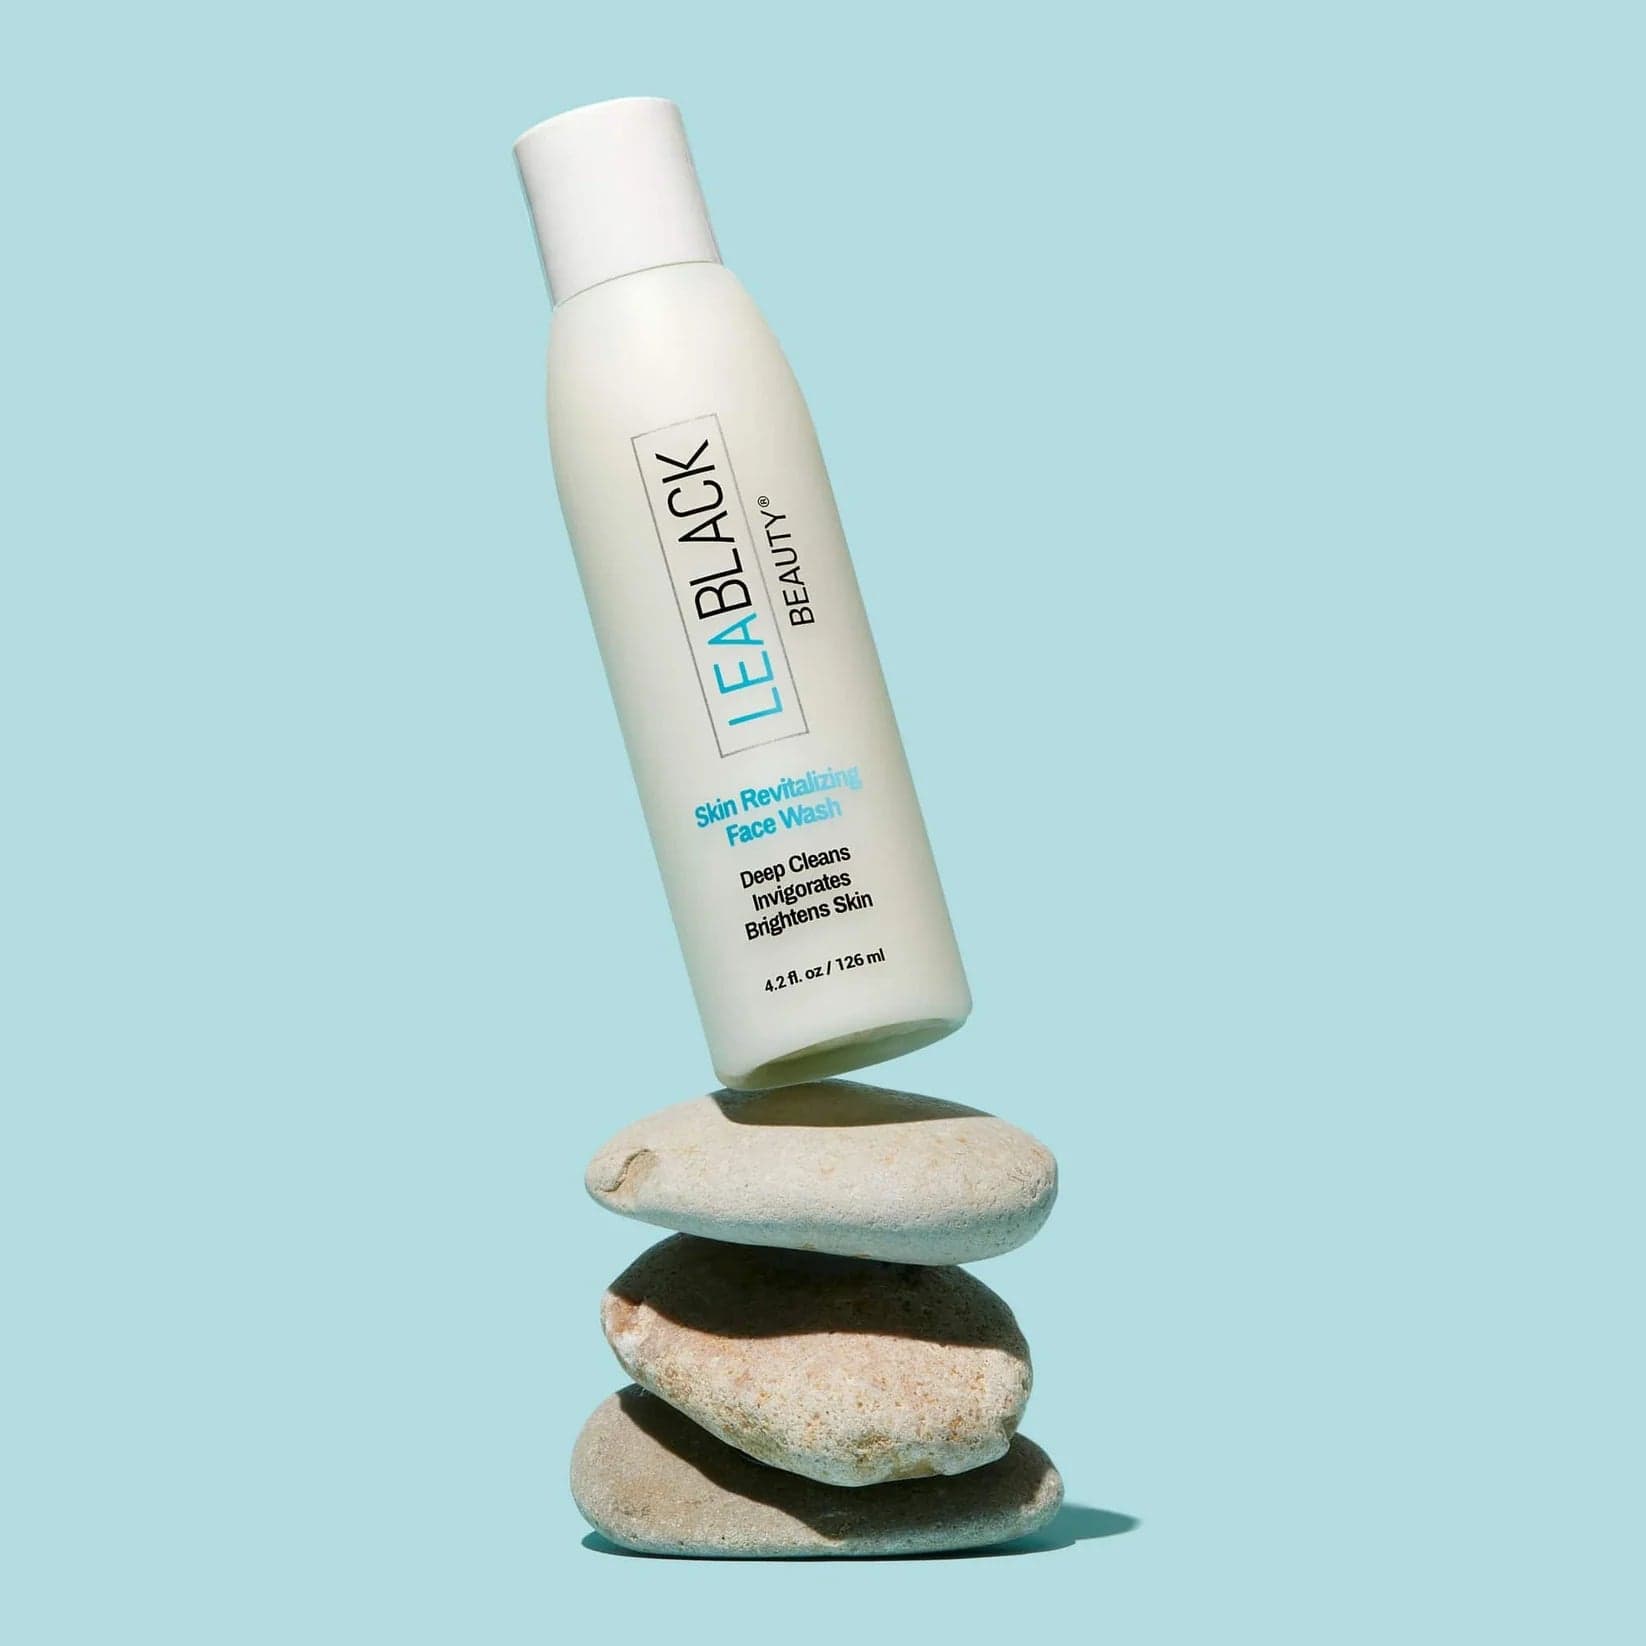 A bottle of Lea Black Beauty® Skin Revitalizing Daily Face Wash on a stack of three stones